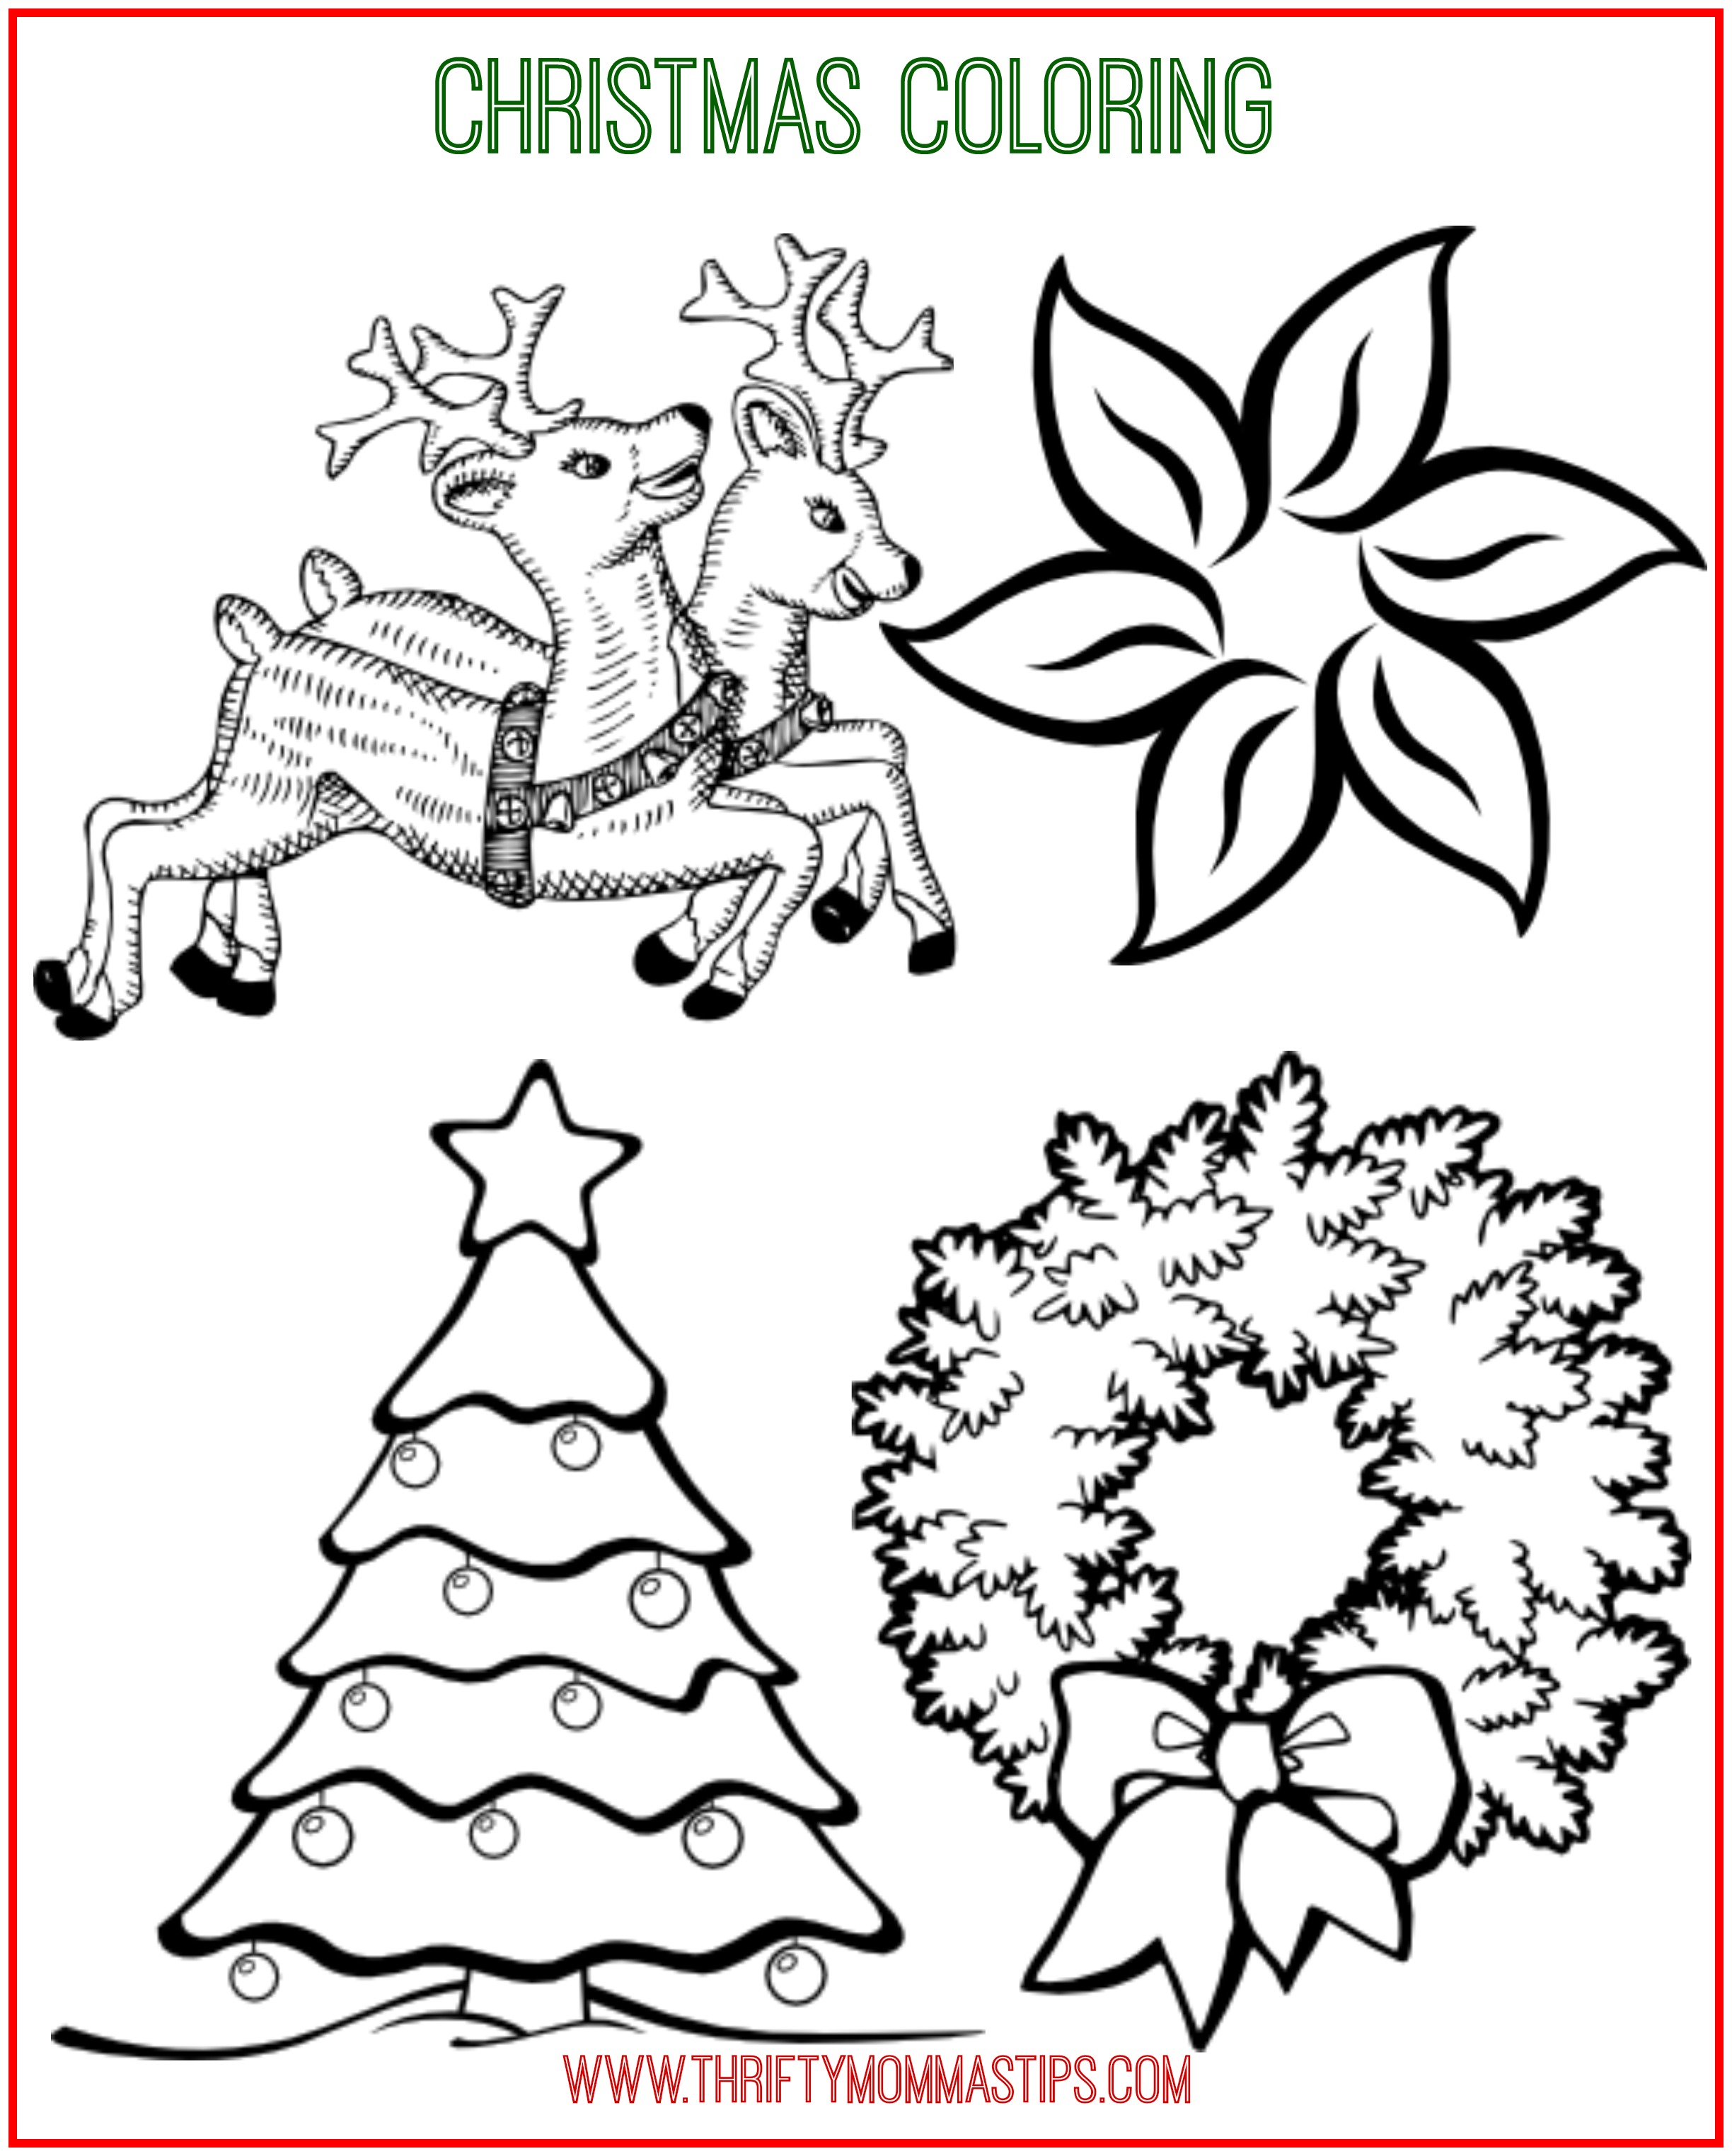 Christmas coloring page printables â thrifty mommas tips